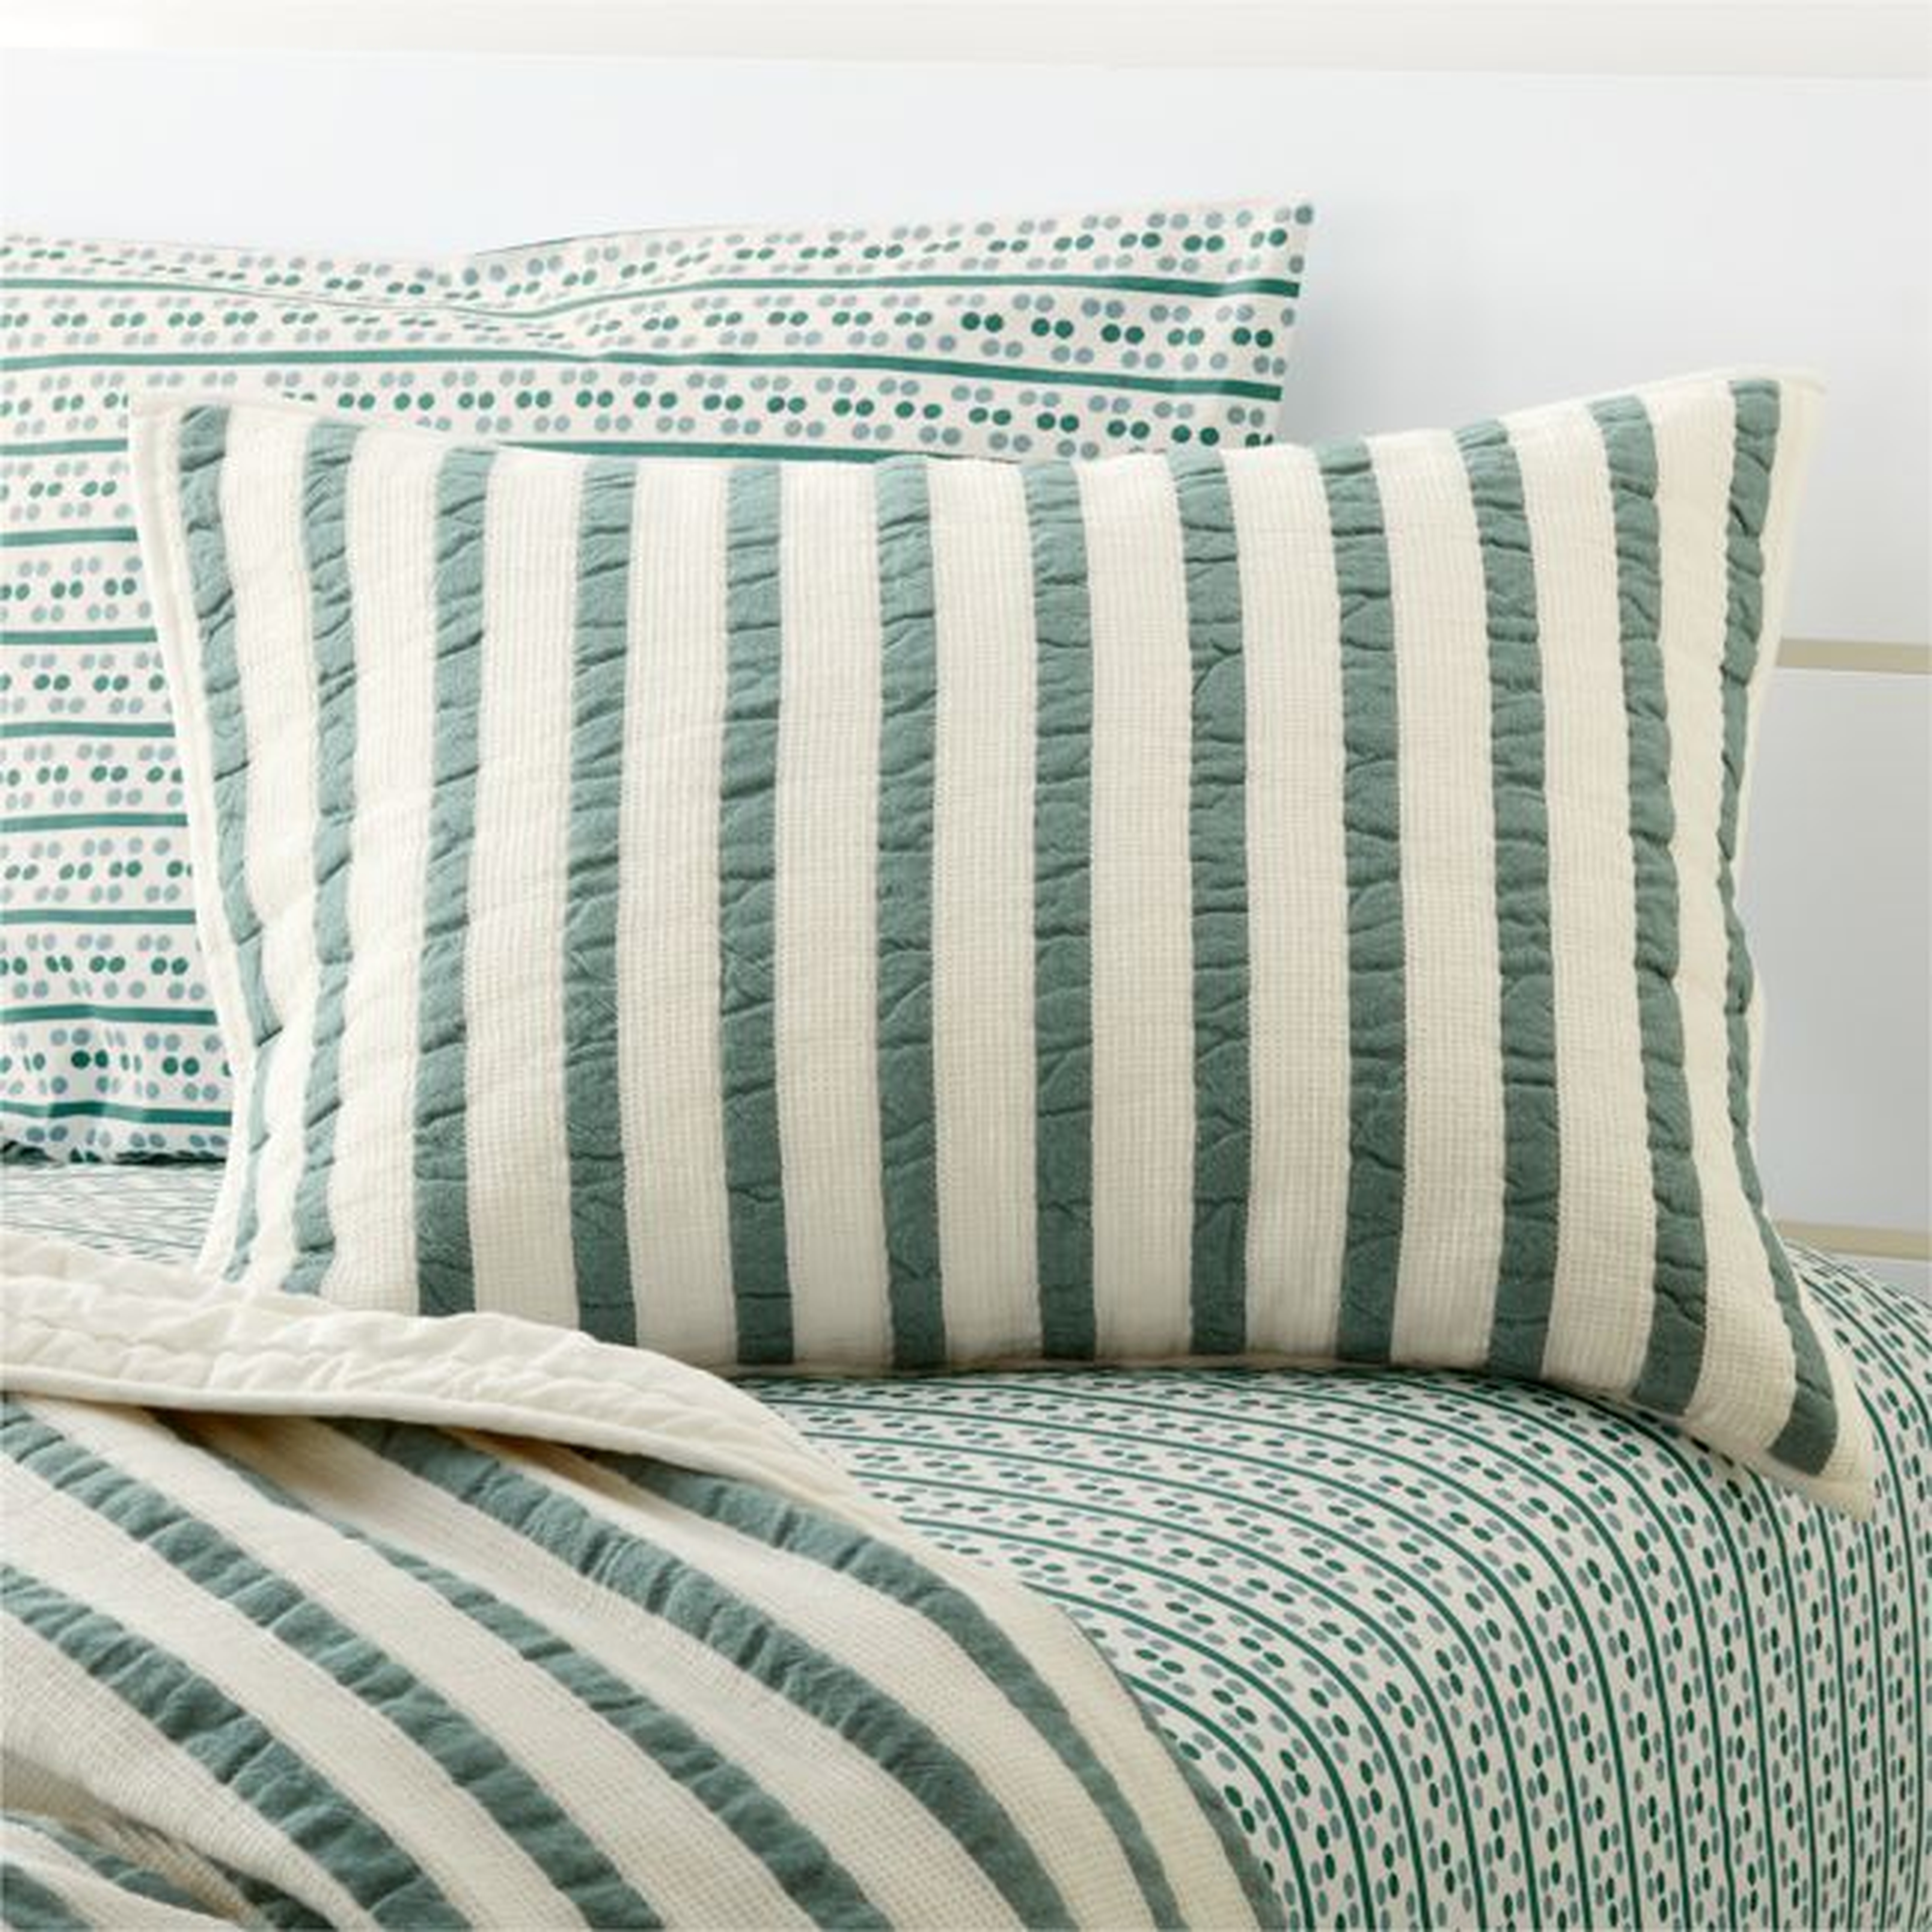 Teal Striped Waffle Weave Organic Cotton Kids Pillow Sham - Crate and Barrel